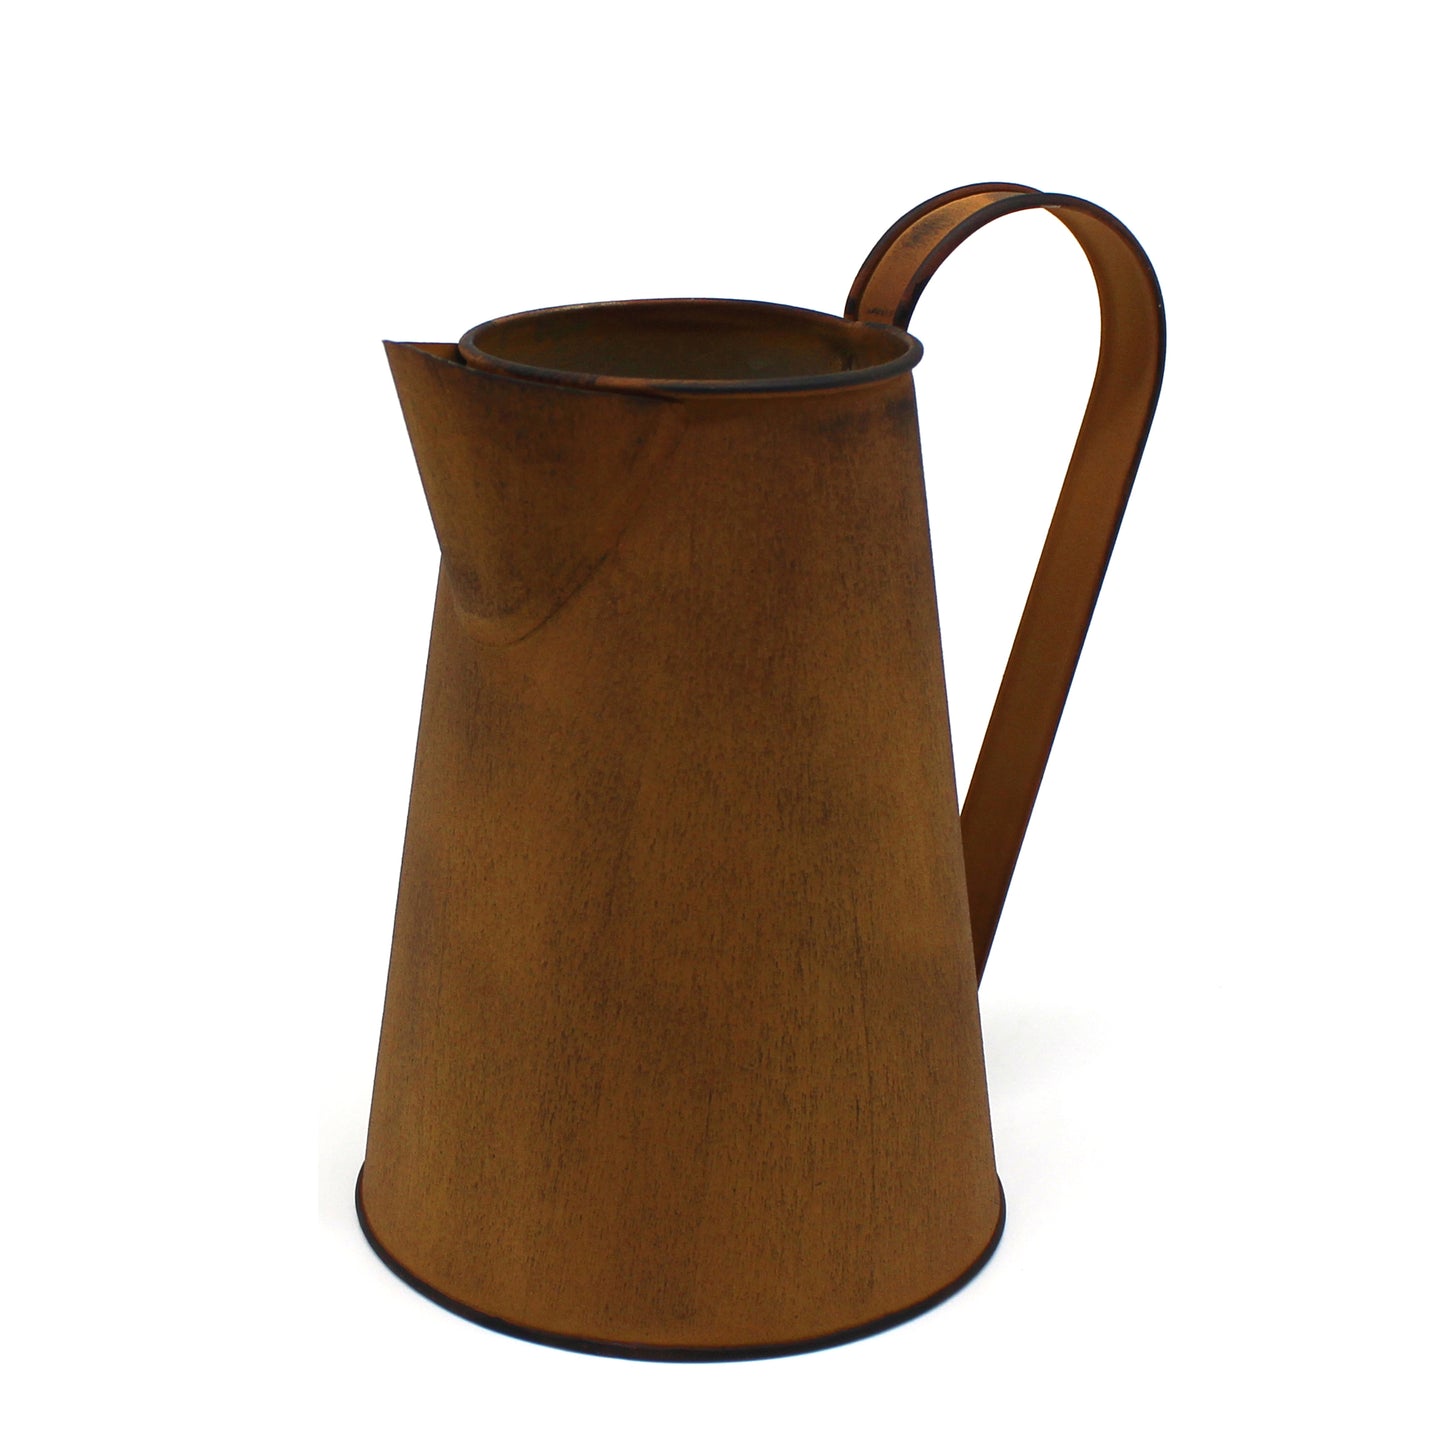 CVHOMEDECO. 7 Inch Rusty Milk Pitcher, Country Rustic Primitives Metal Watering Can Jug Vase for Home and Garden Décor.